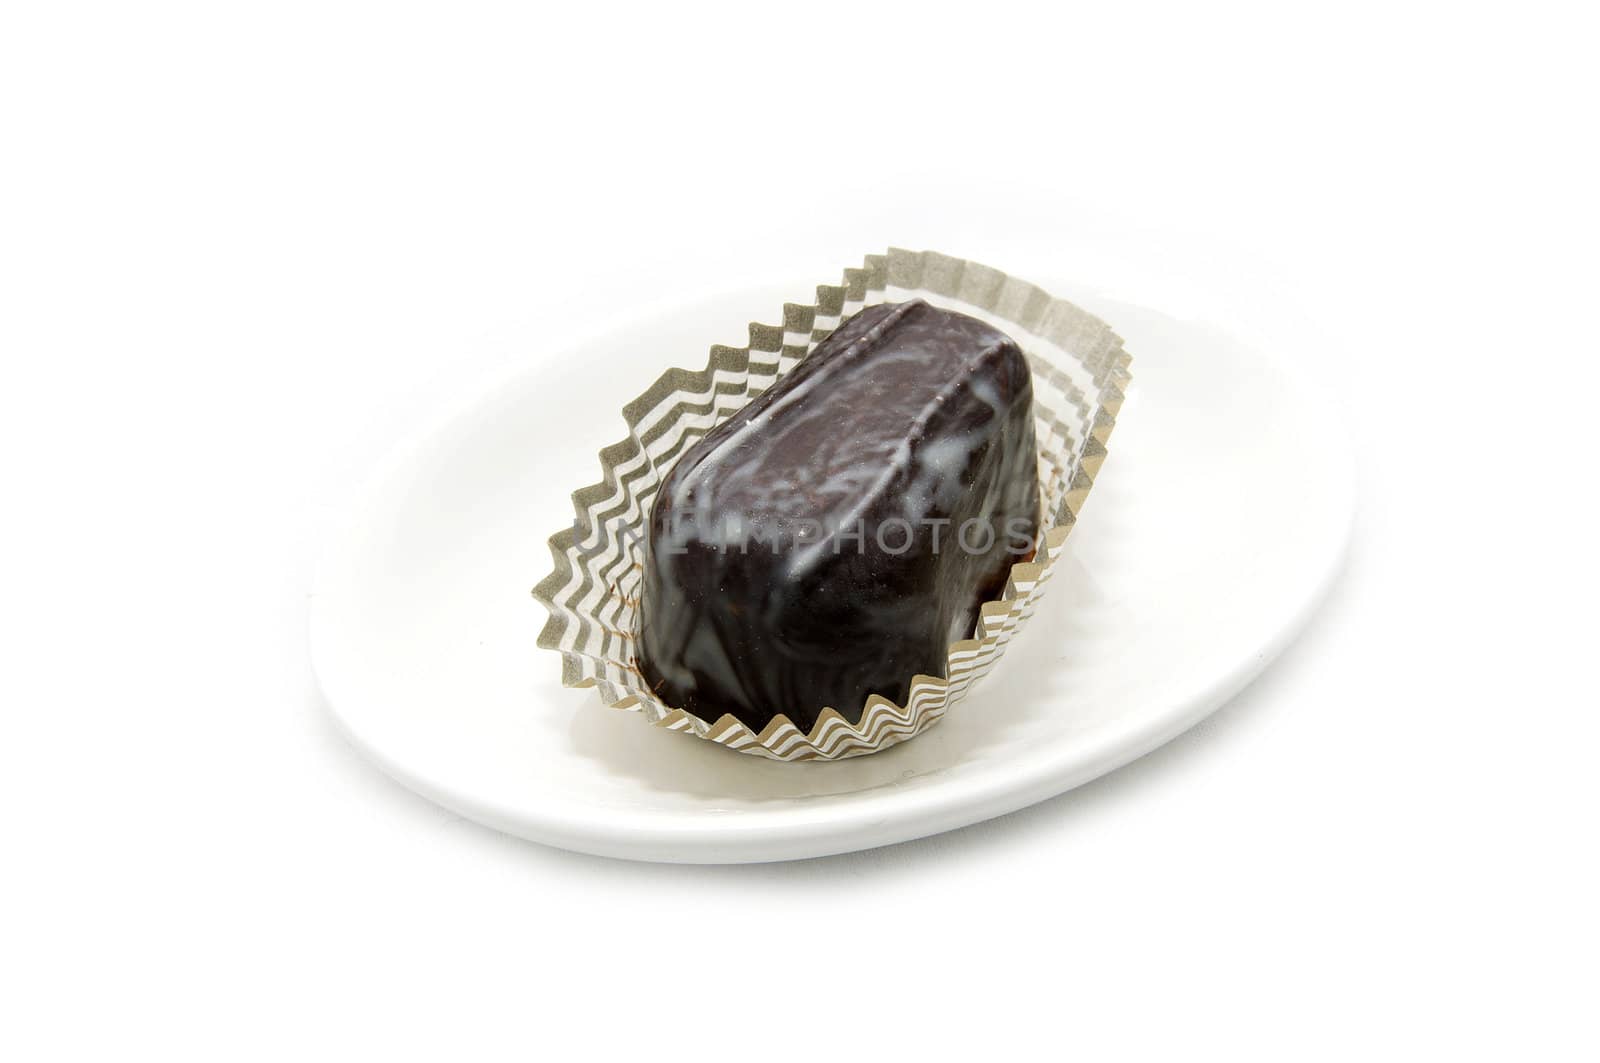 candy with a creamy filling on a white background